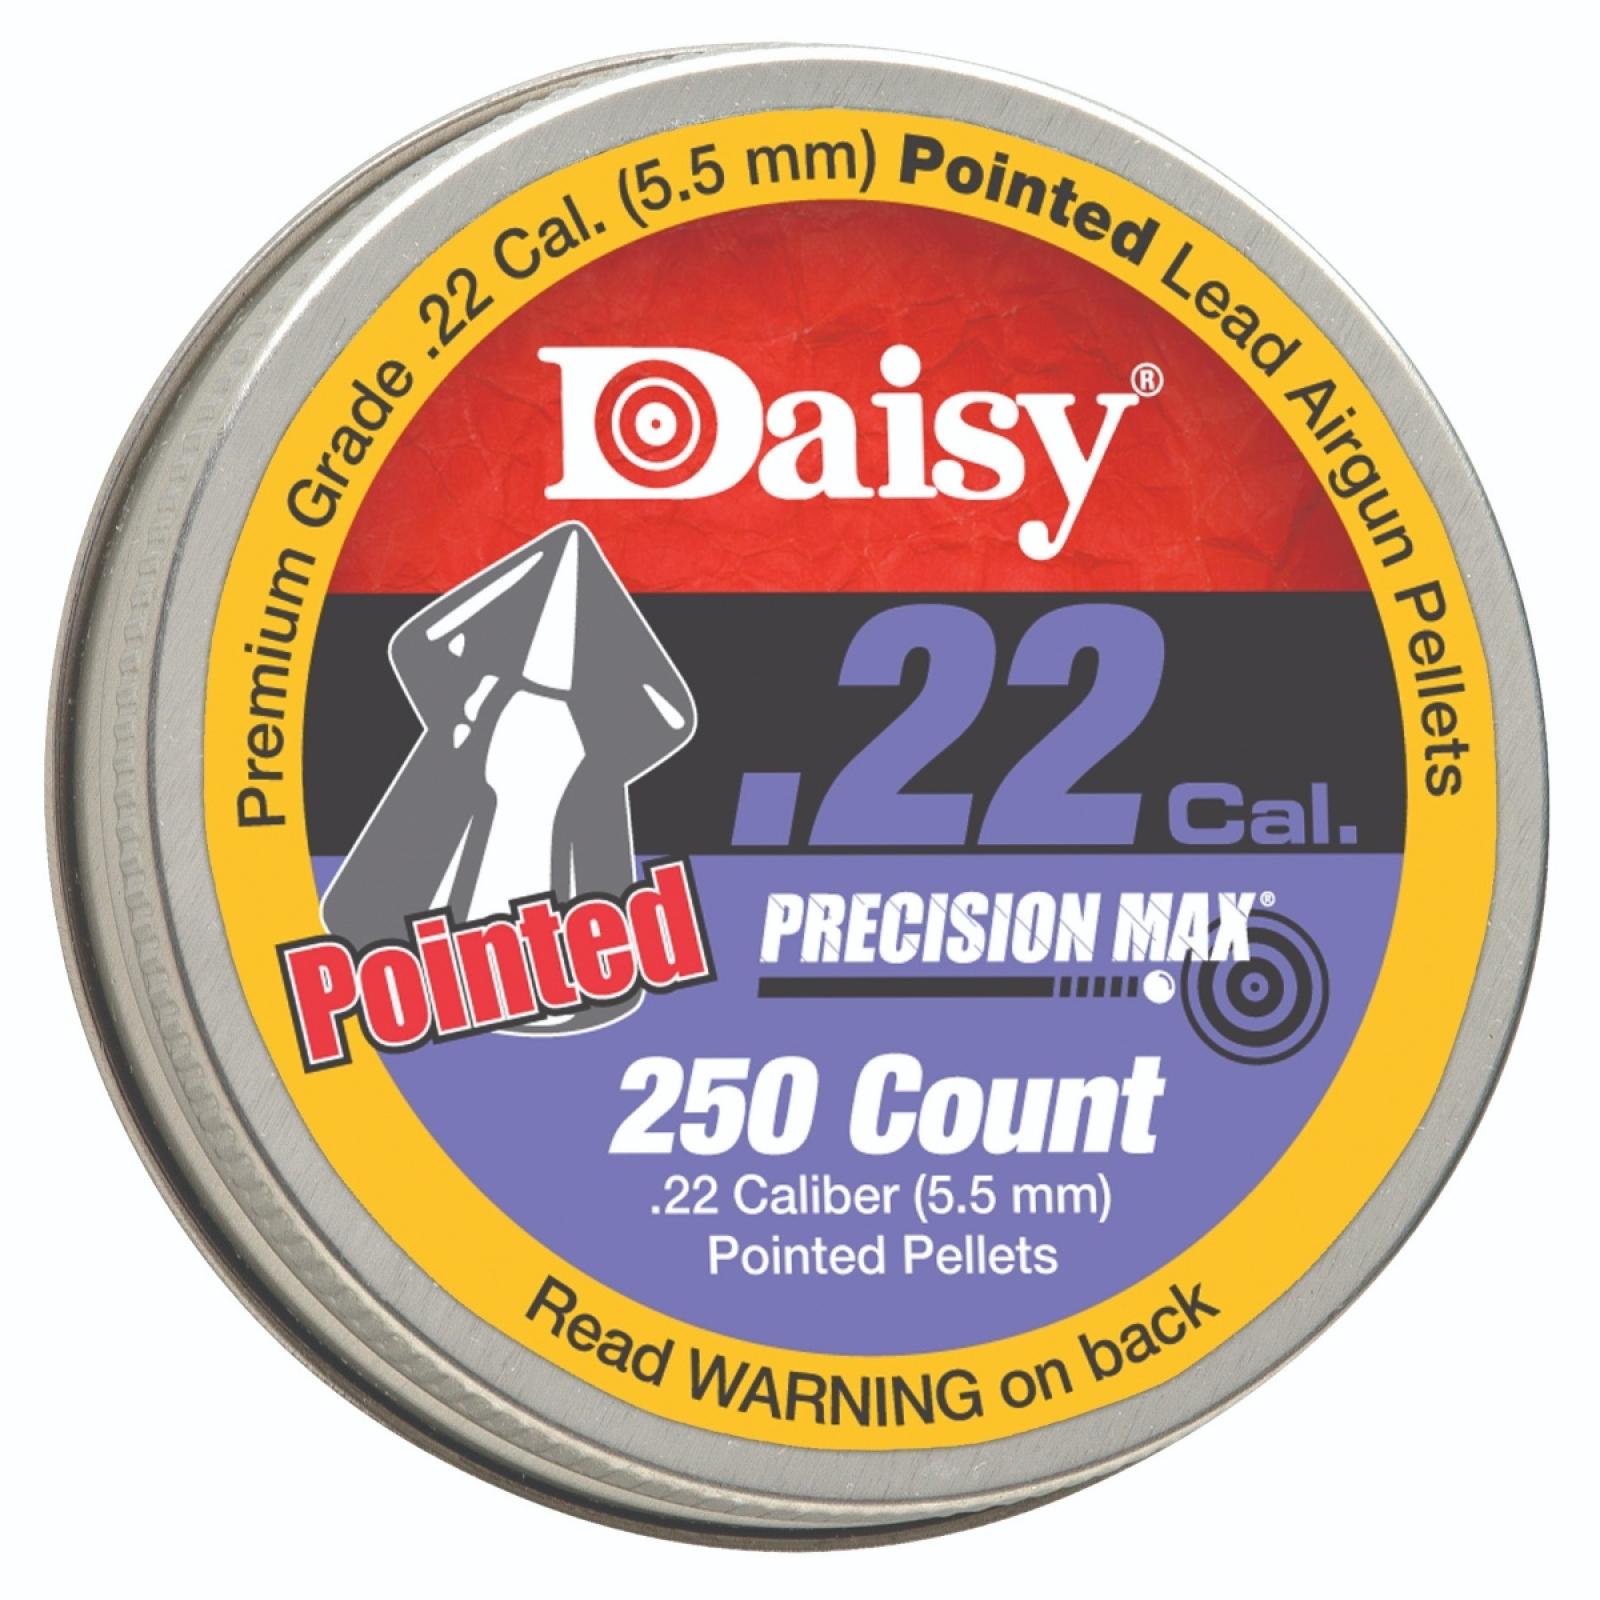 Daisy PrecisionMax 250 count .22 Cal. Pointed Field Pellets Model 7922